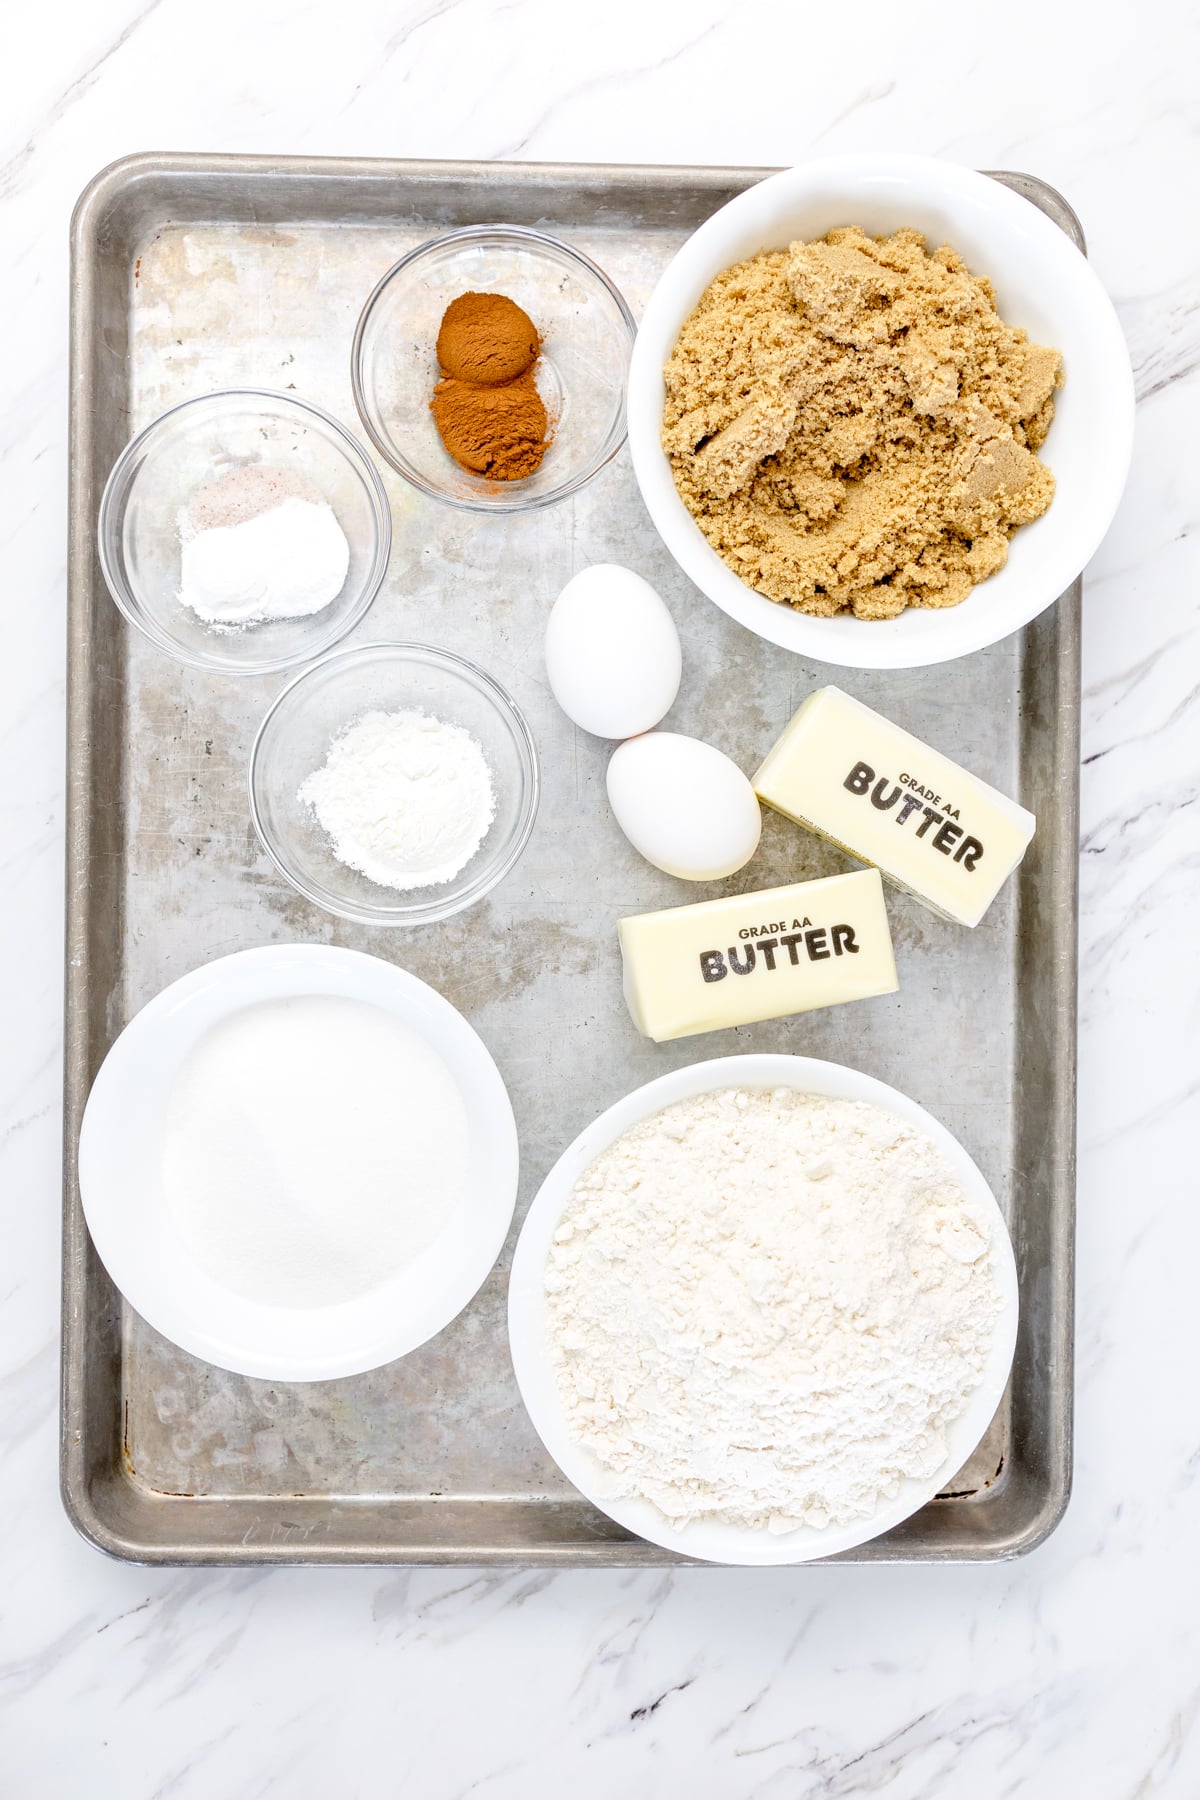 Top view of a baking tray with ingredients needed for coffee cake cookies in small bowls.